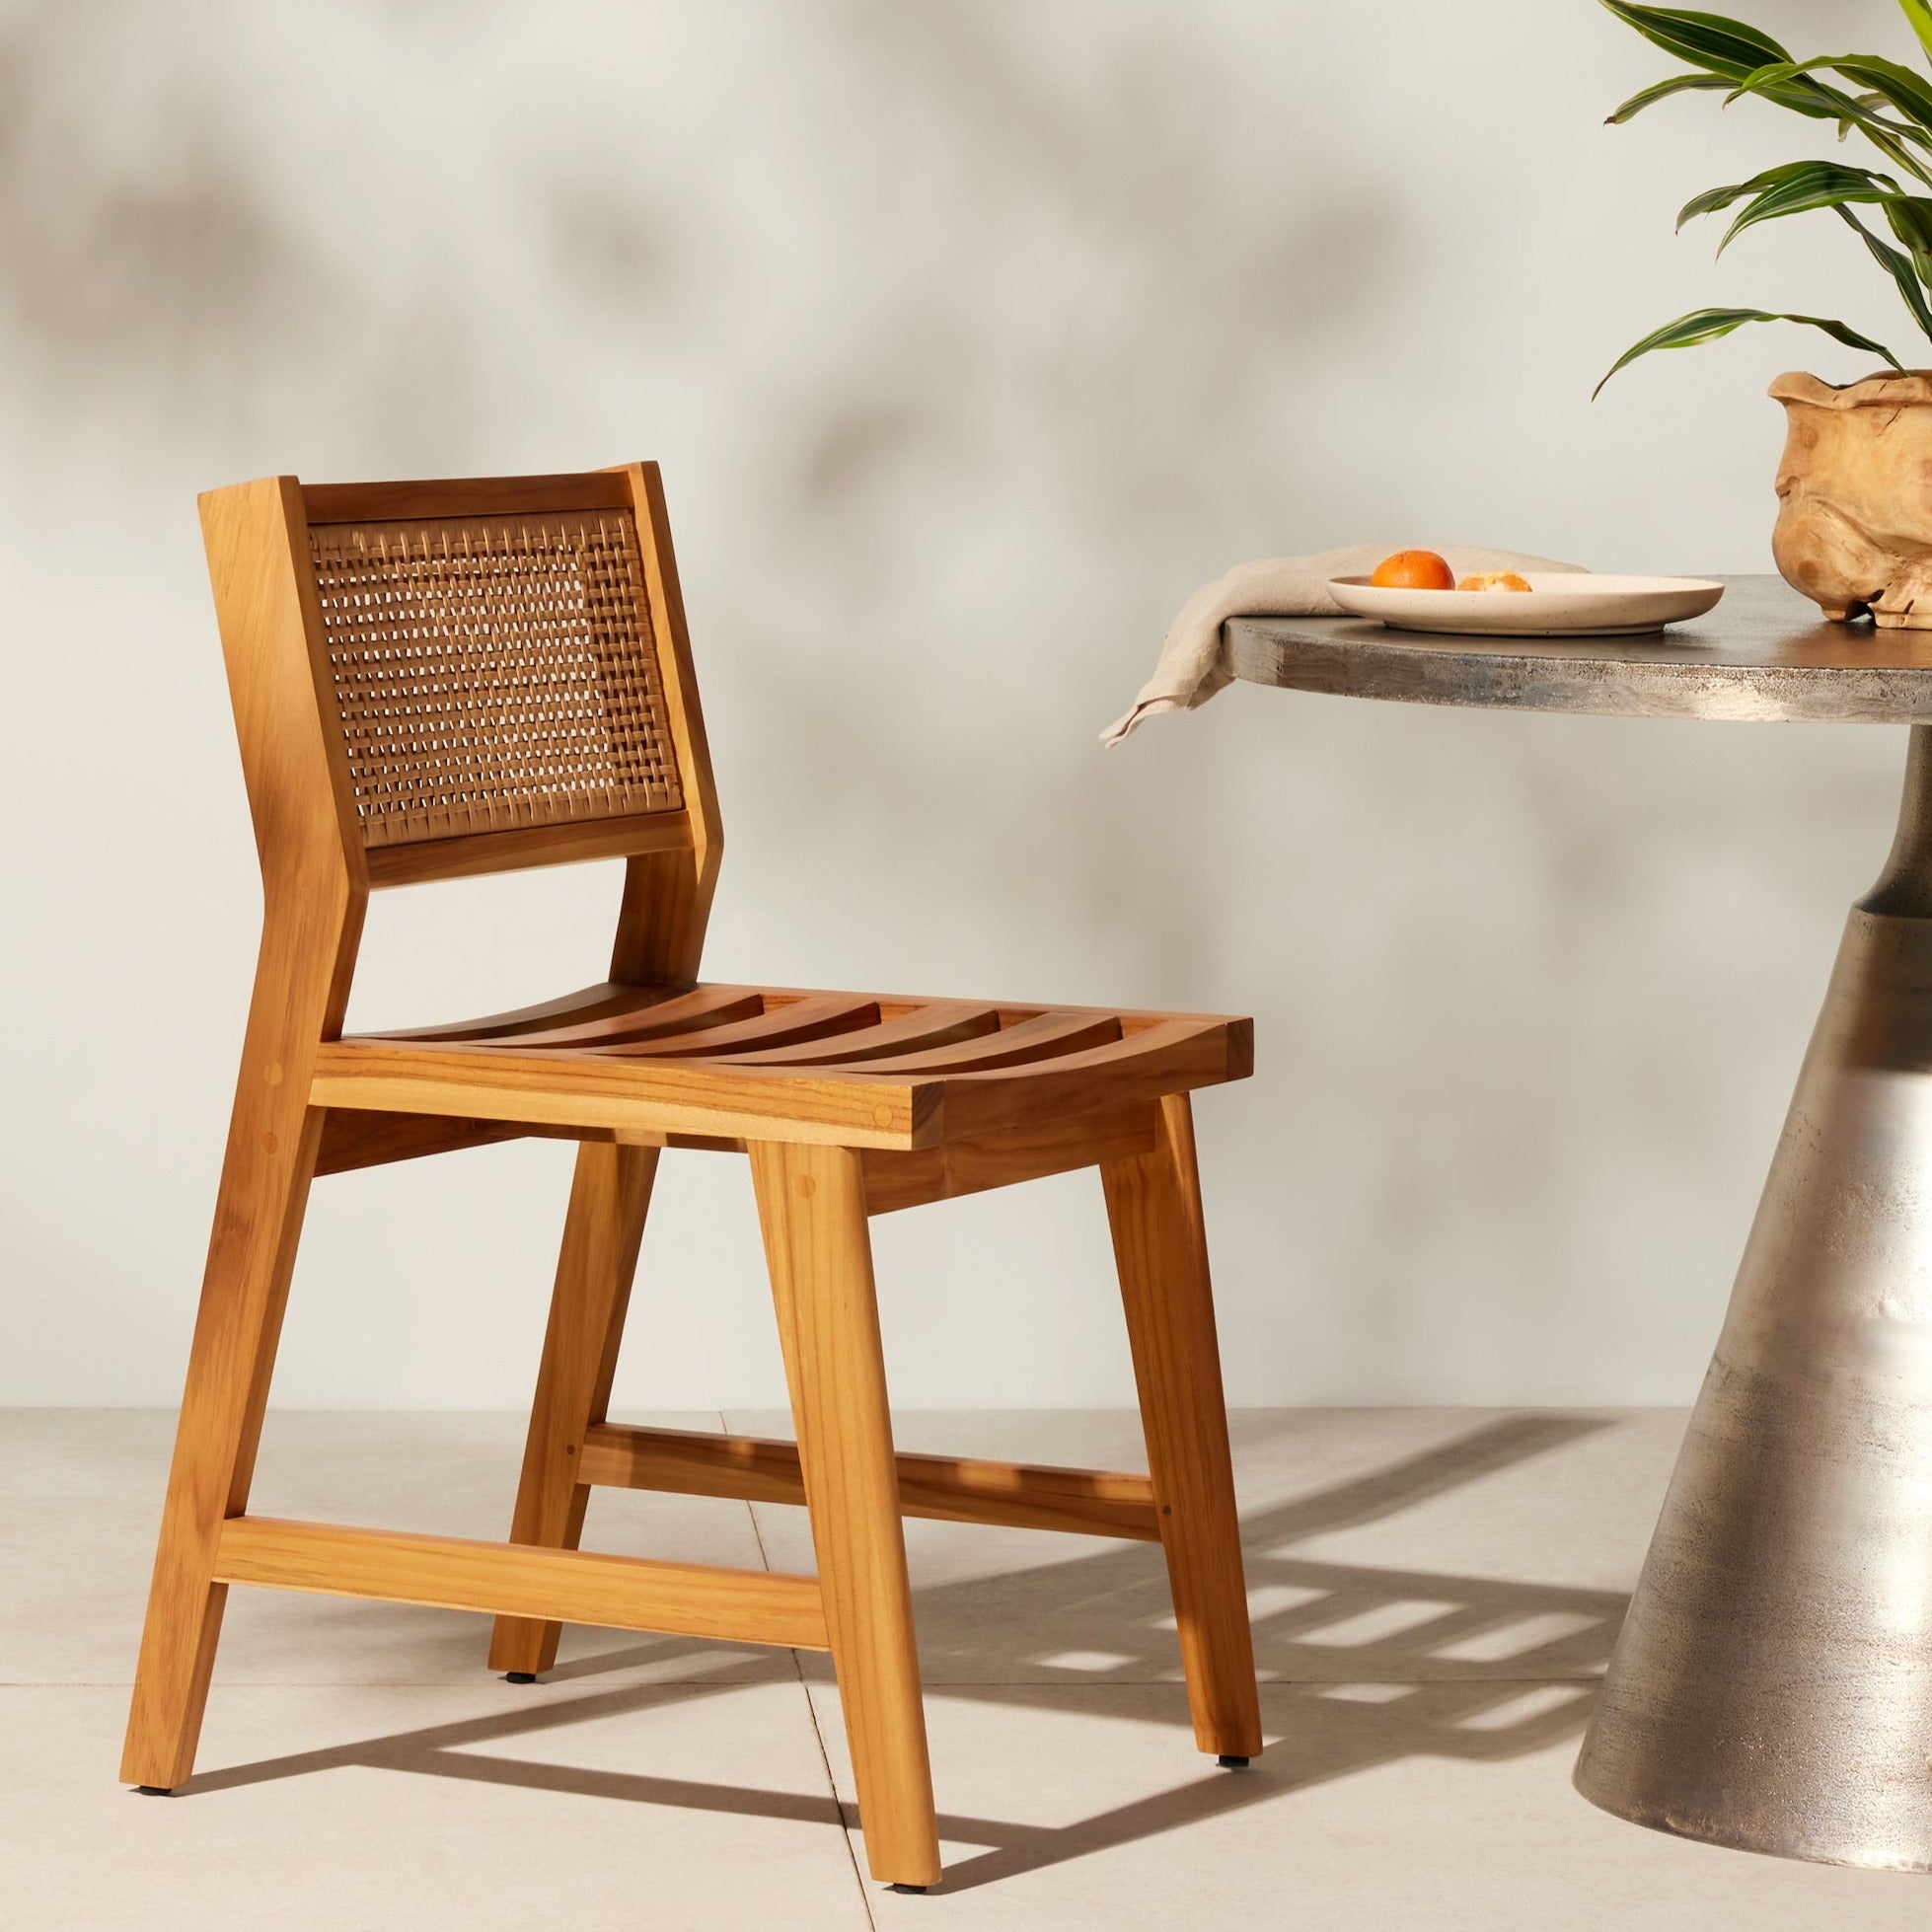 Merit Outdoor Dining Chair